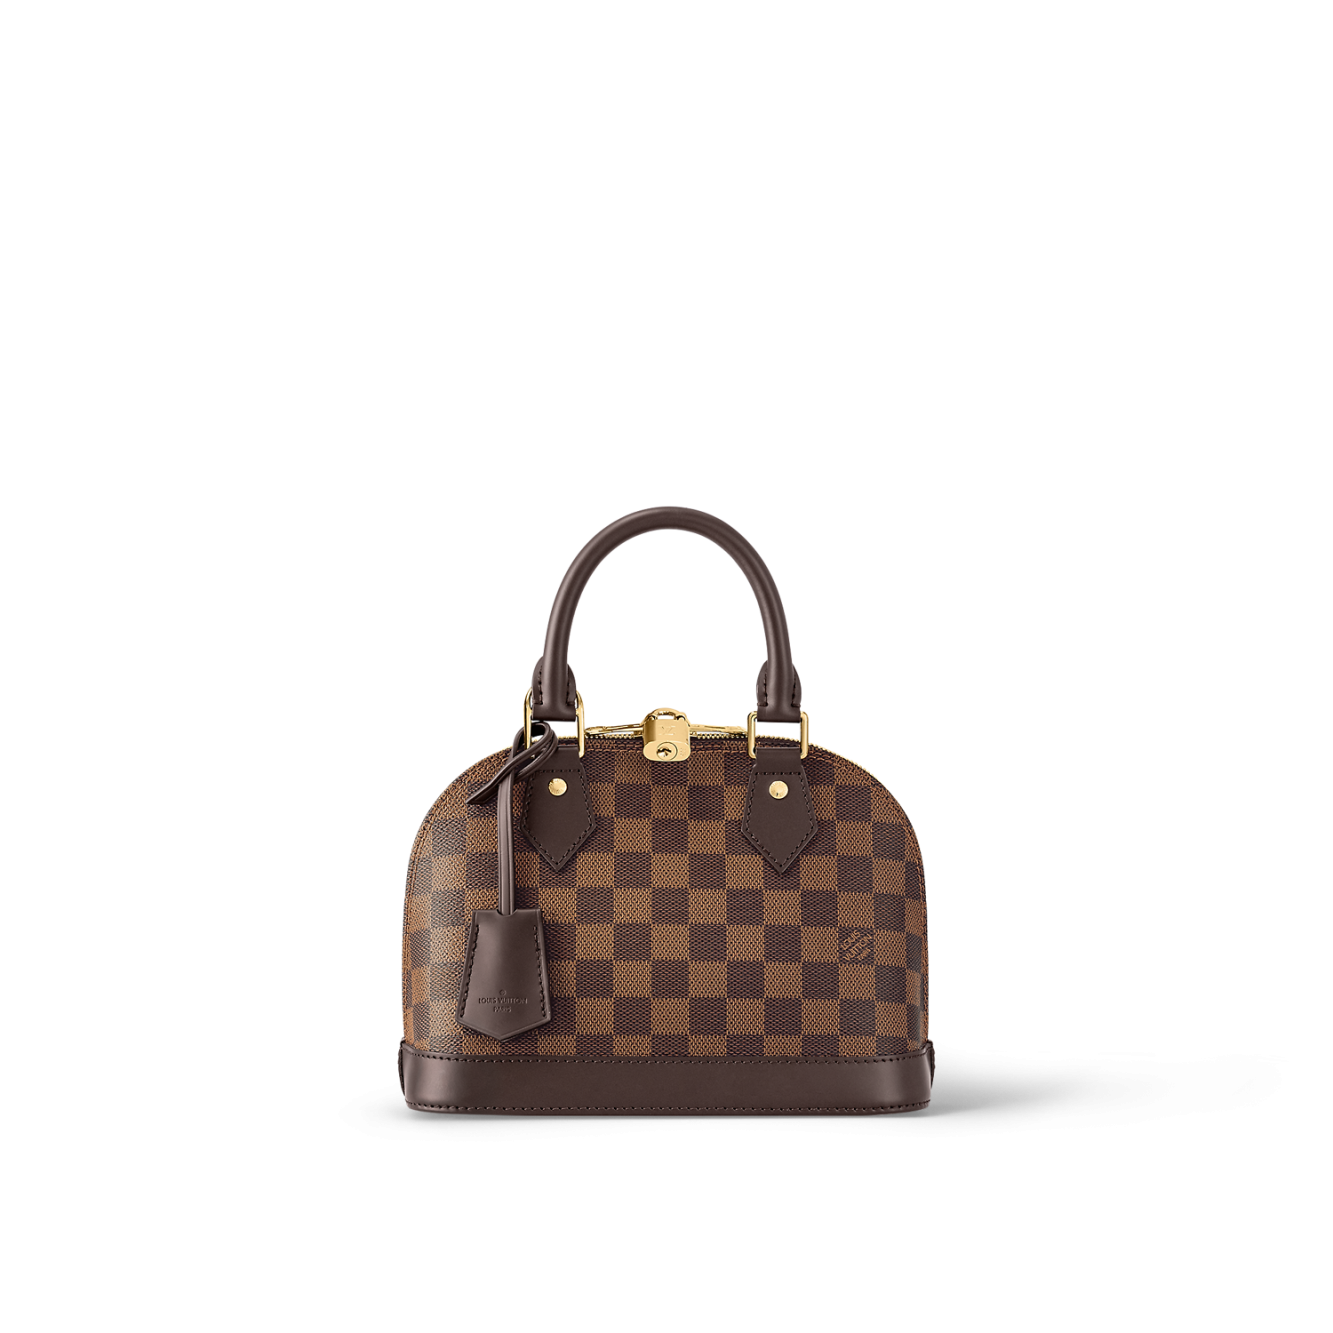 5 WAYS TO STYLE LOUIS VUITTON ALMA BB: THE RULE OF 5  Louis vuitton alma bb,  Louis vuitton alma, Louis vuitton outfit